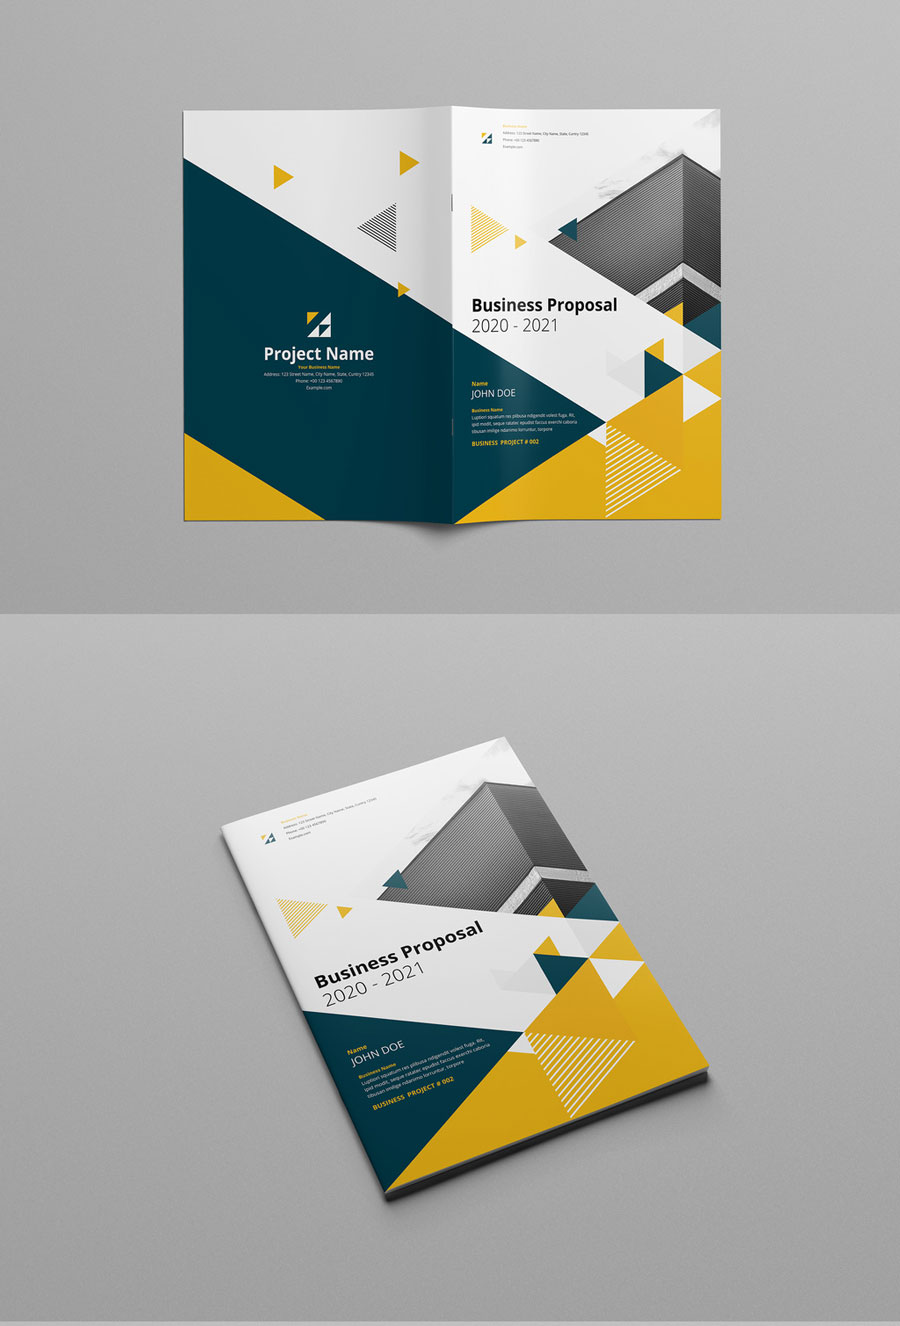 Yellow And Gray Booklet Layout